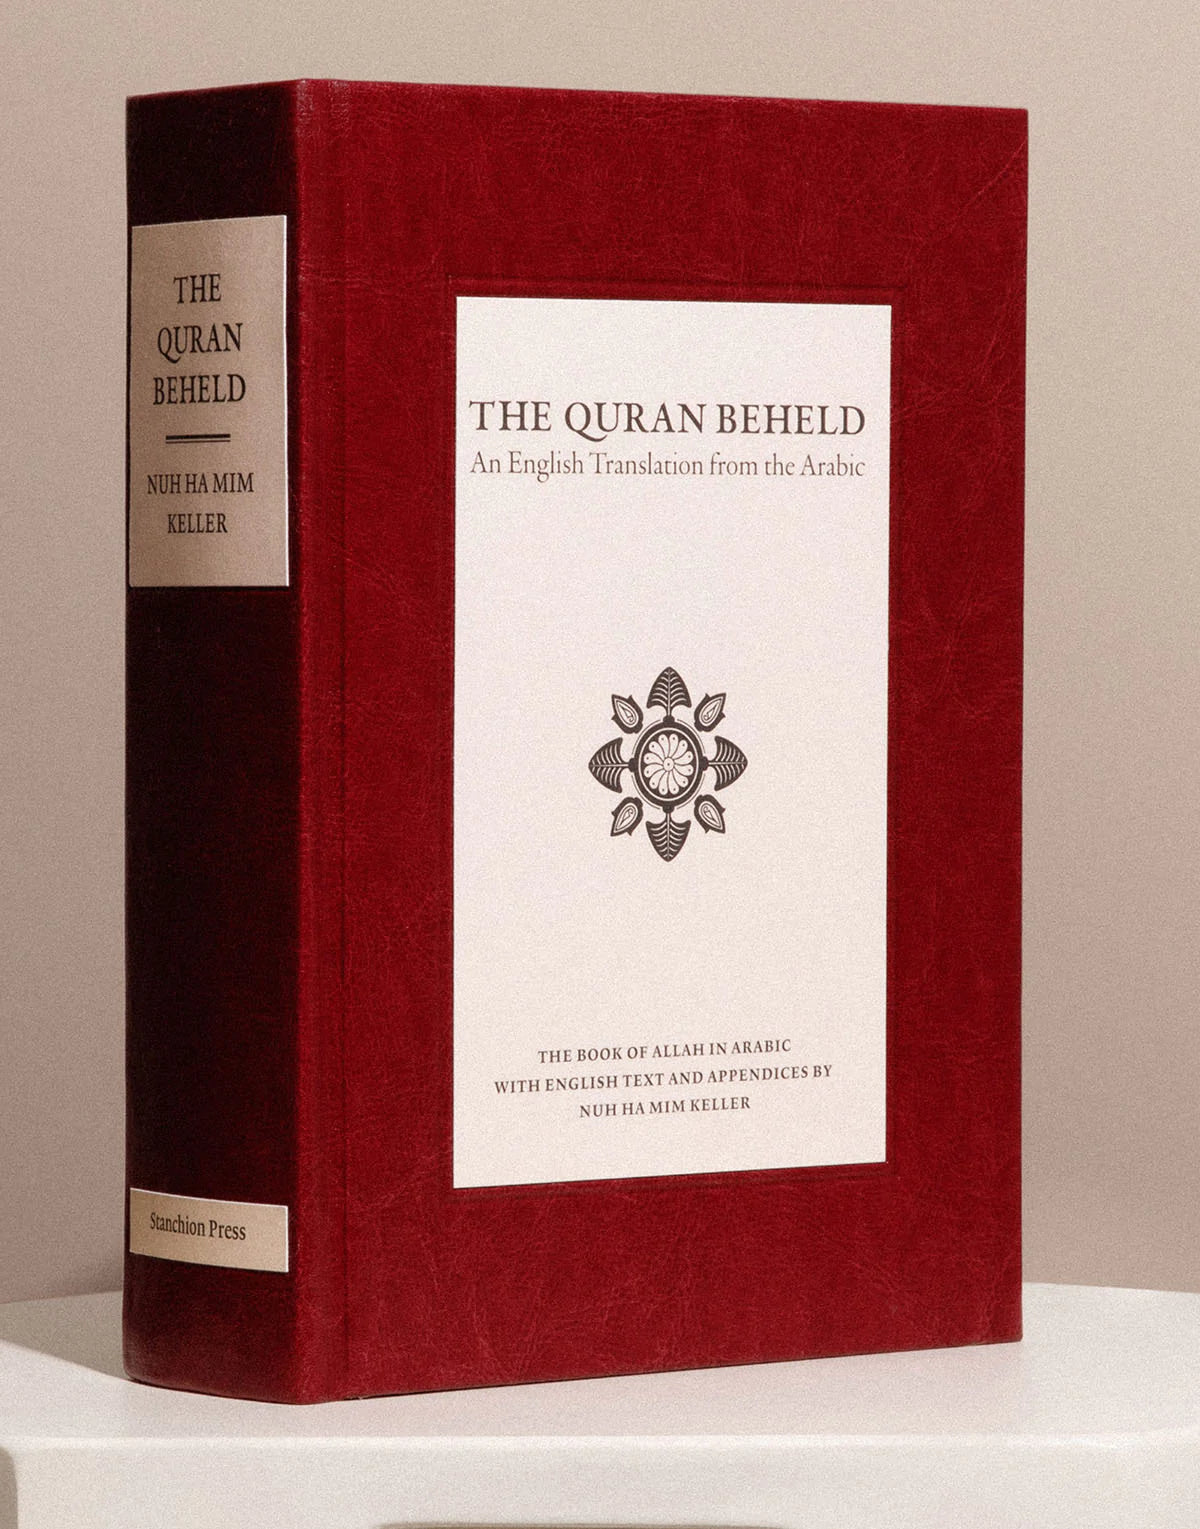 The Quran Beheld (Without Slip Cover)